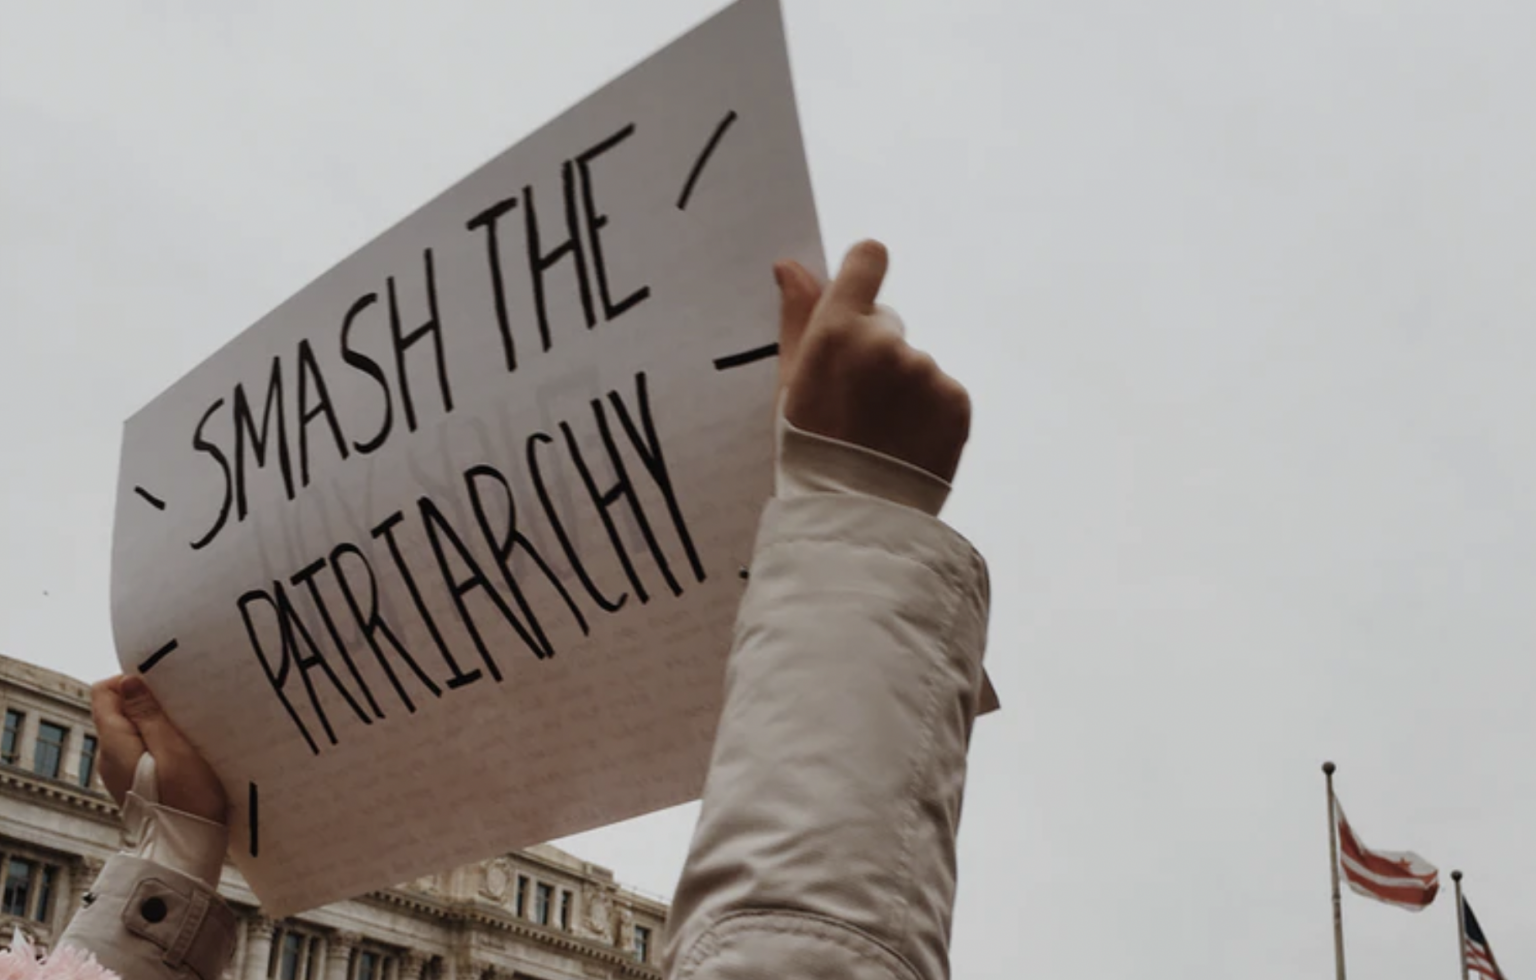 Dismantling The Patriarchy Why It’s Okay To Be Roaring Mad About